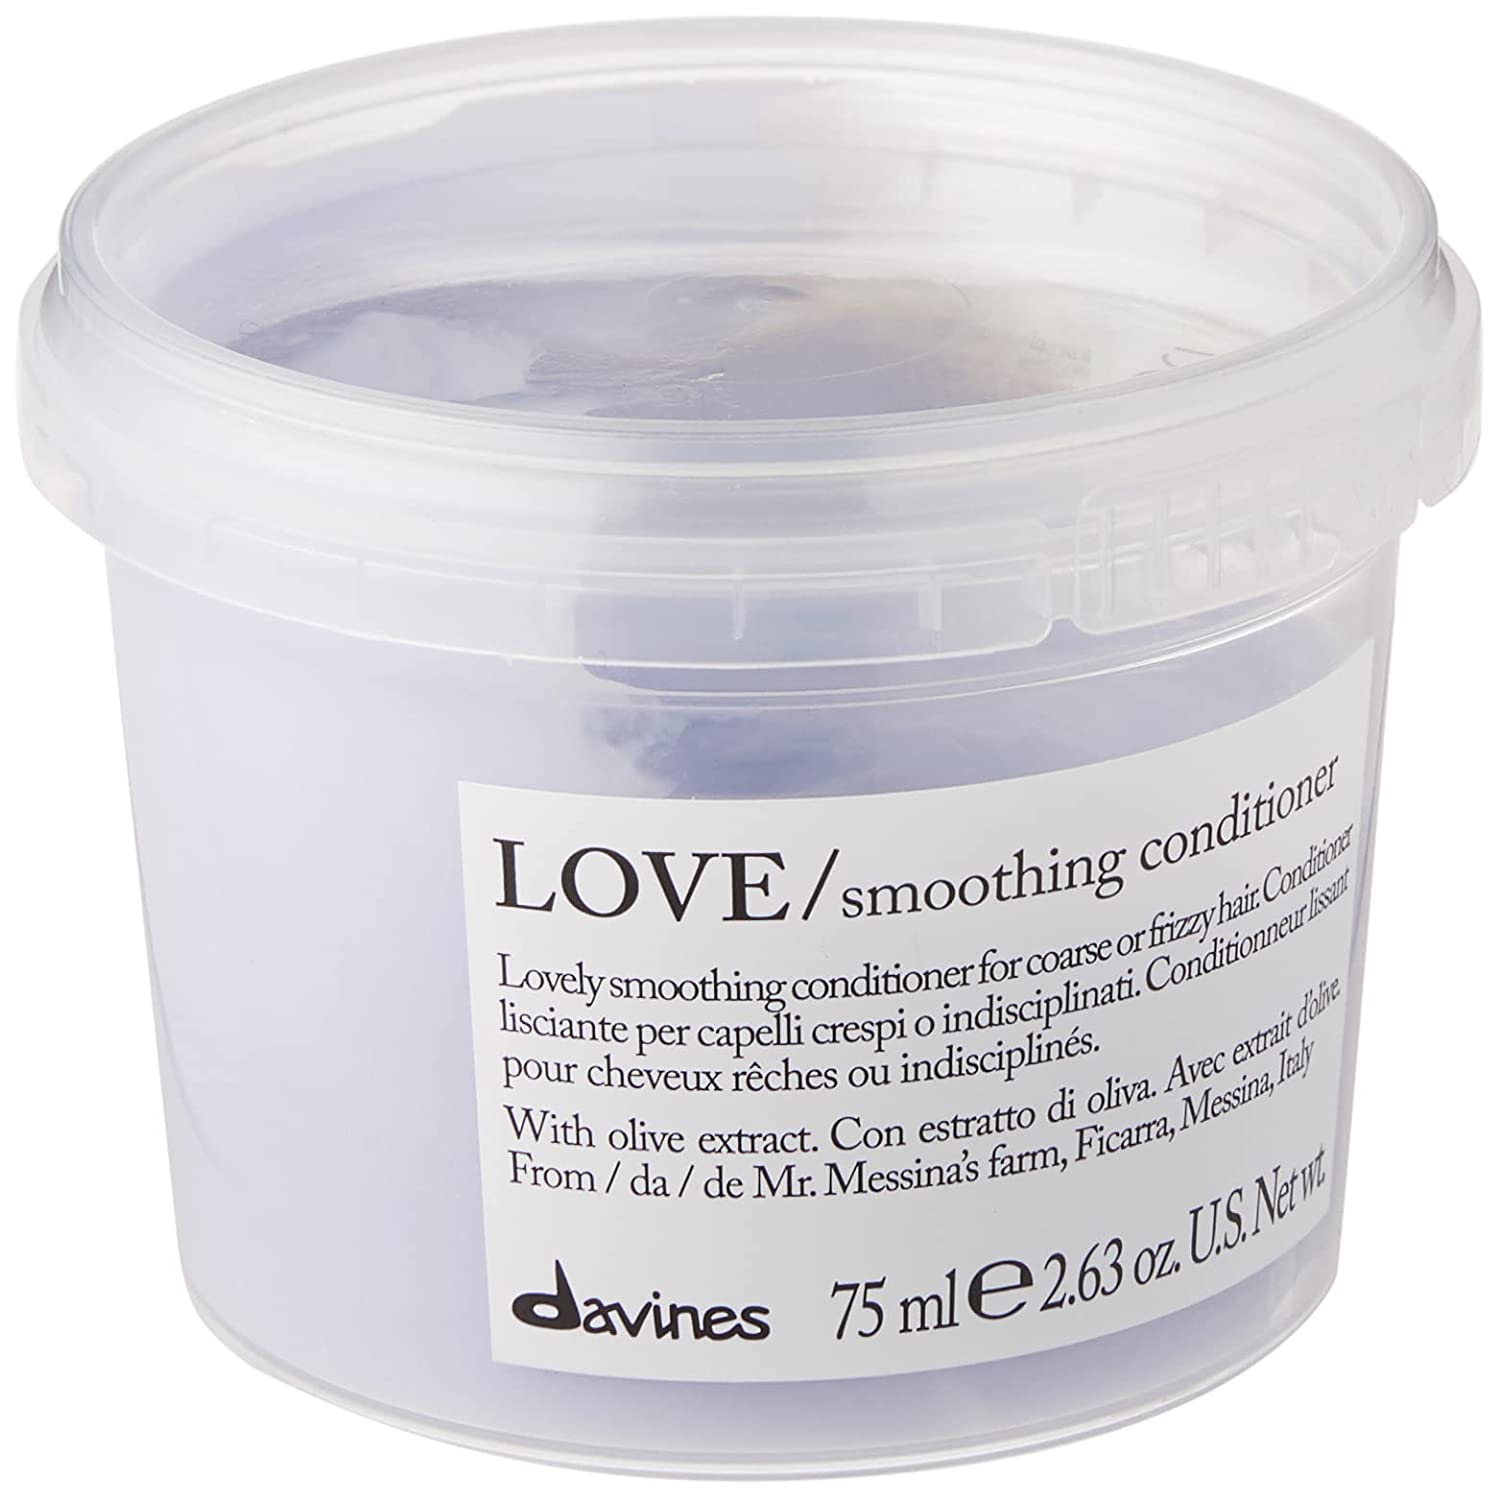 DAVINES love conditioner, lovely smoothing conditioner